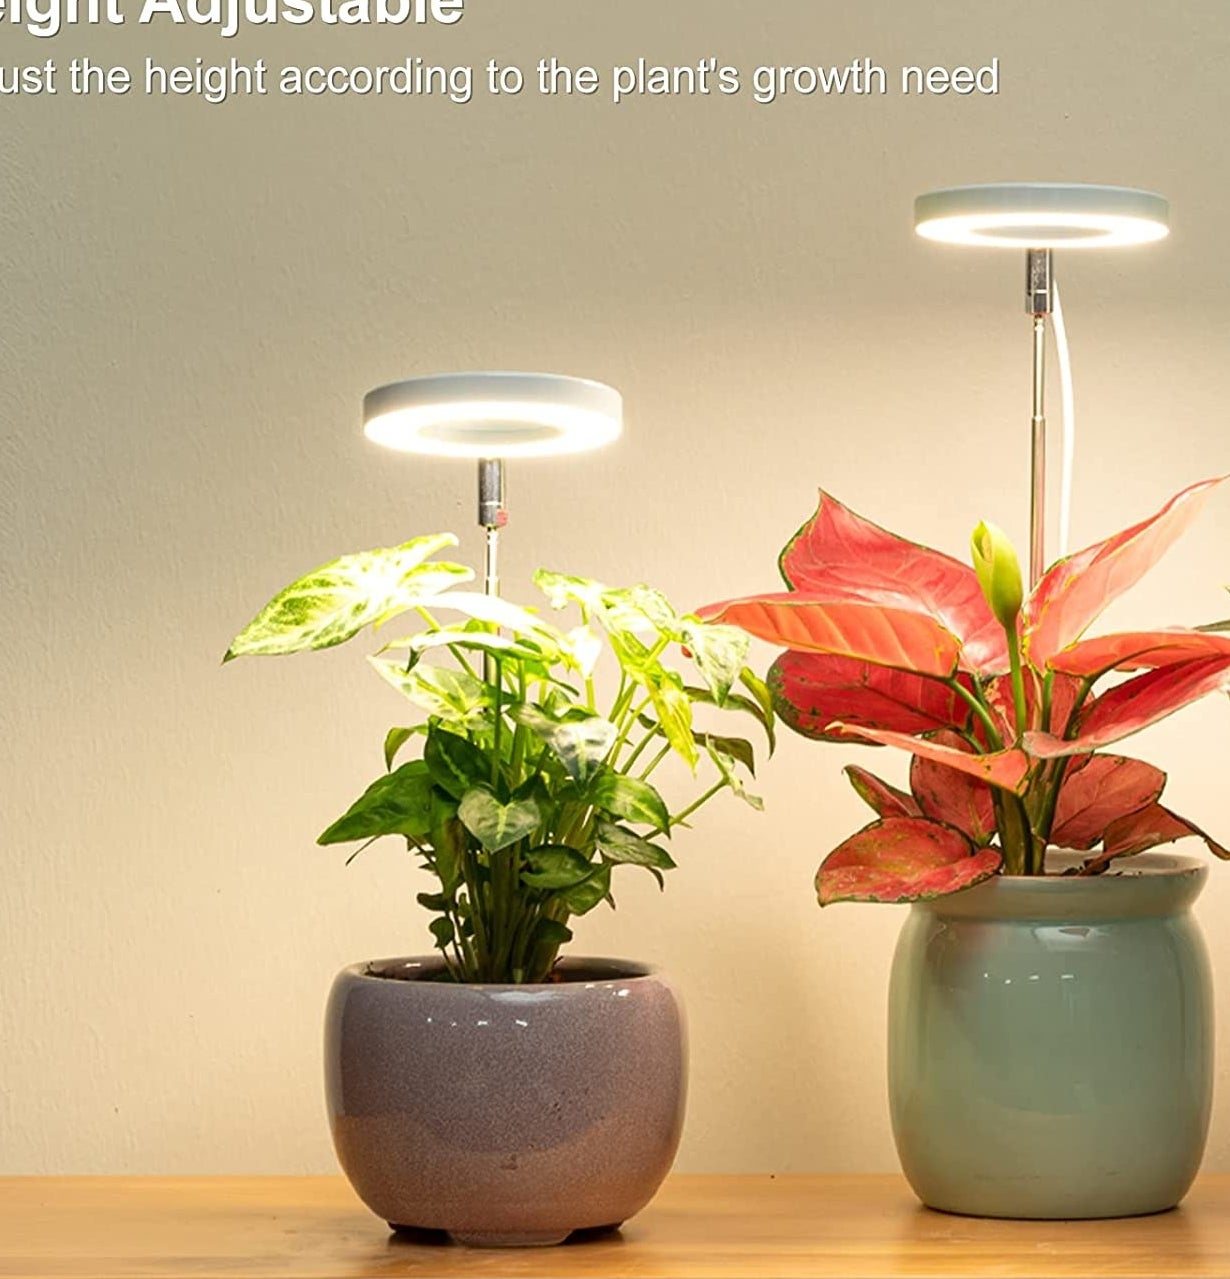 a pair of potted plants with the grow lights inserted into the pots